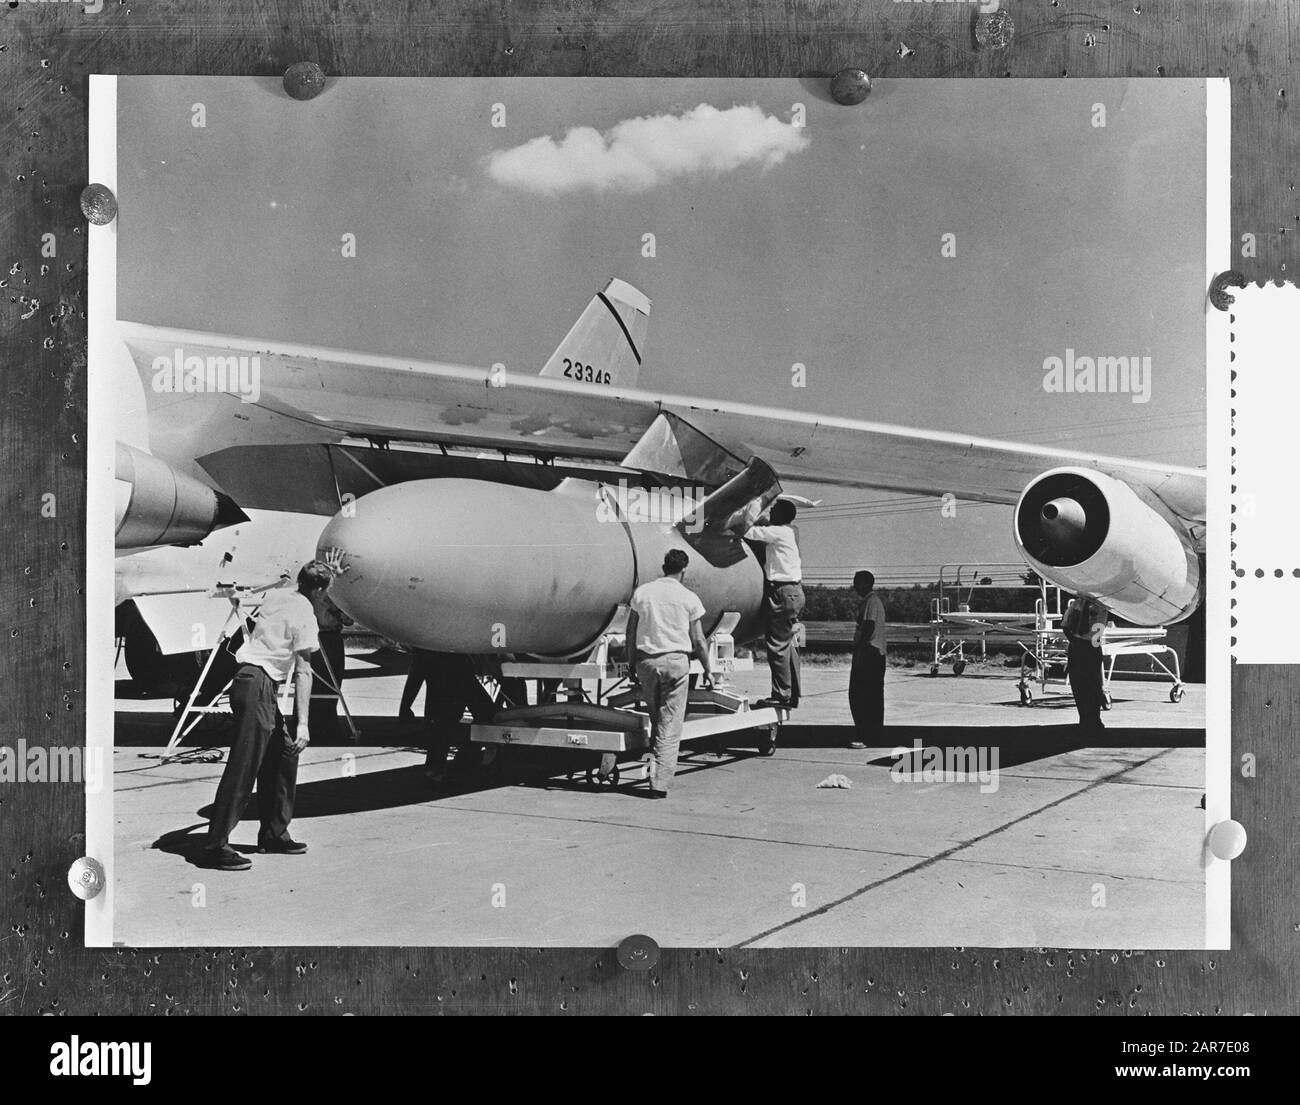 Hanging an external fuel tank under the wing of a B-47 bomber of the USAF Date: February 17, 1956 Keywords: aviation, aircraft Stock Photo